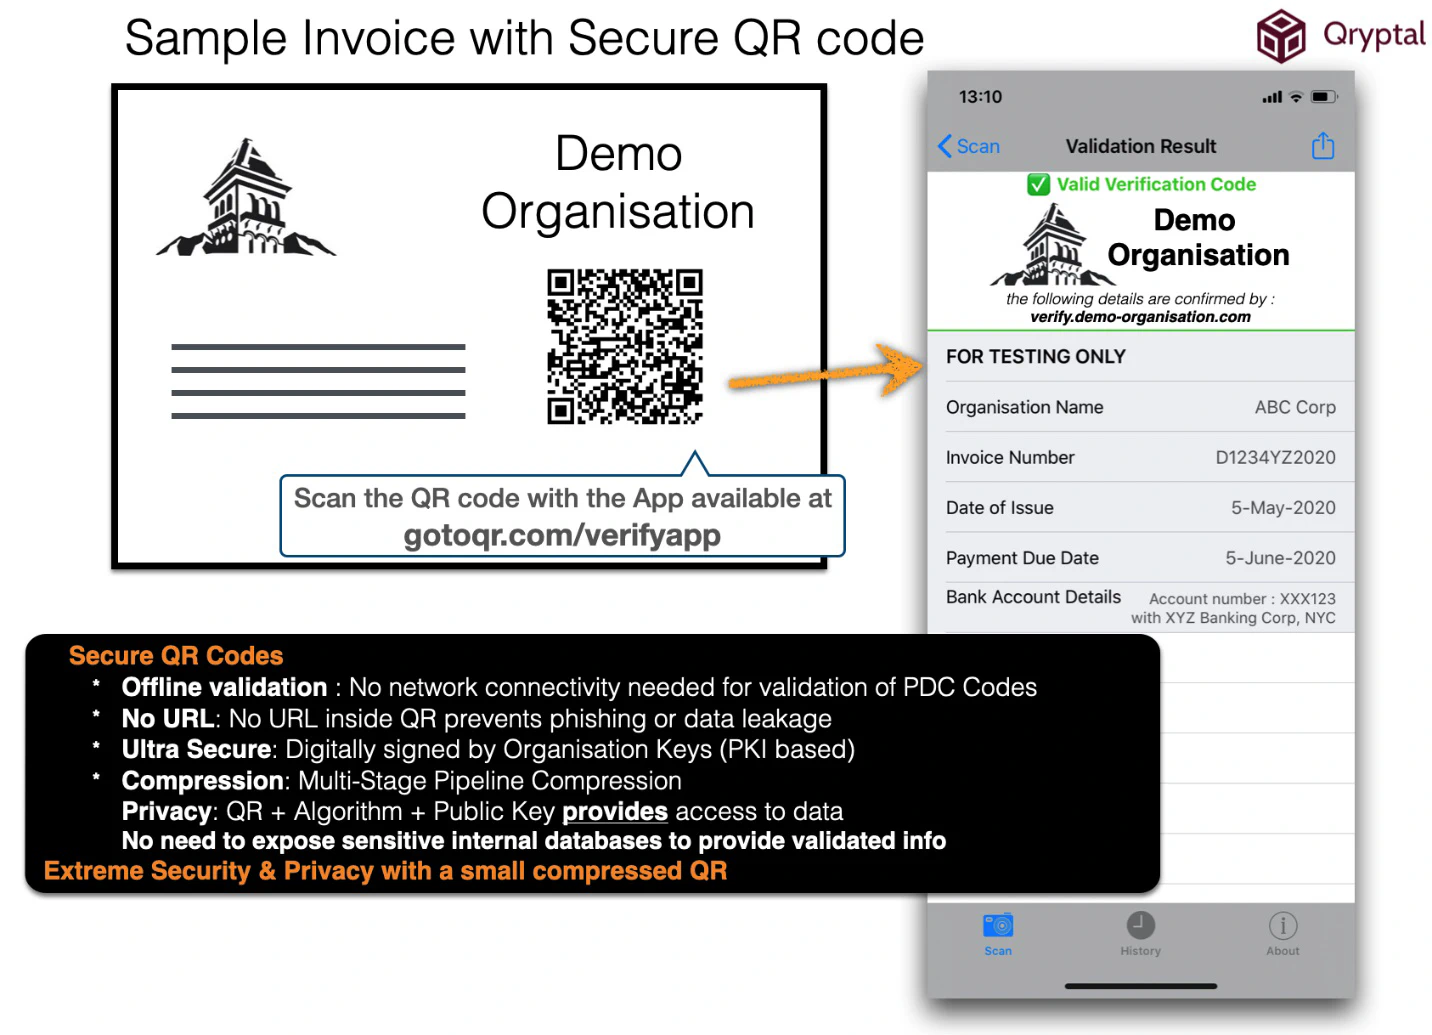 Secure QR based invoice